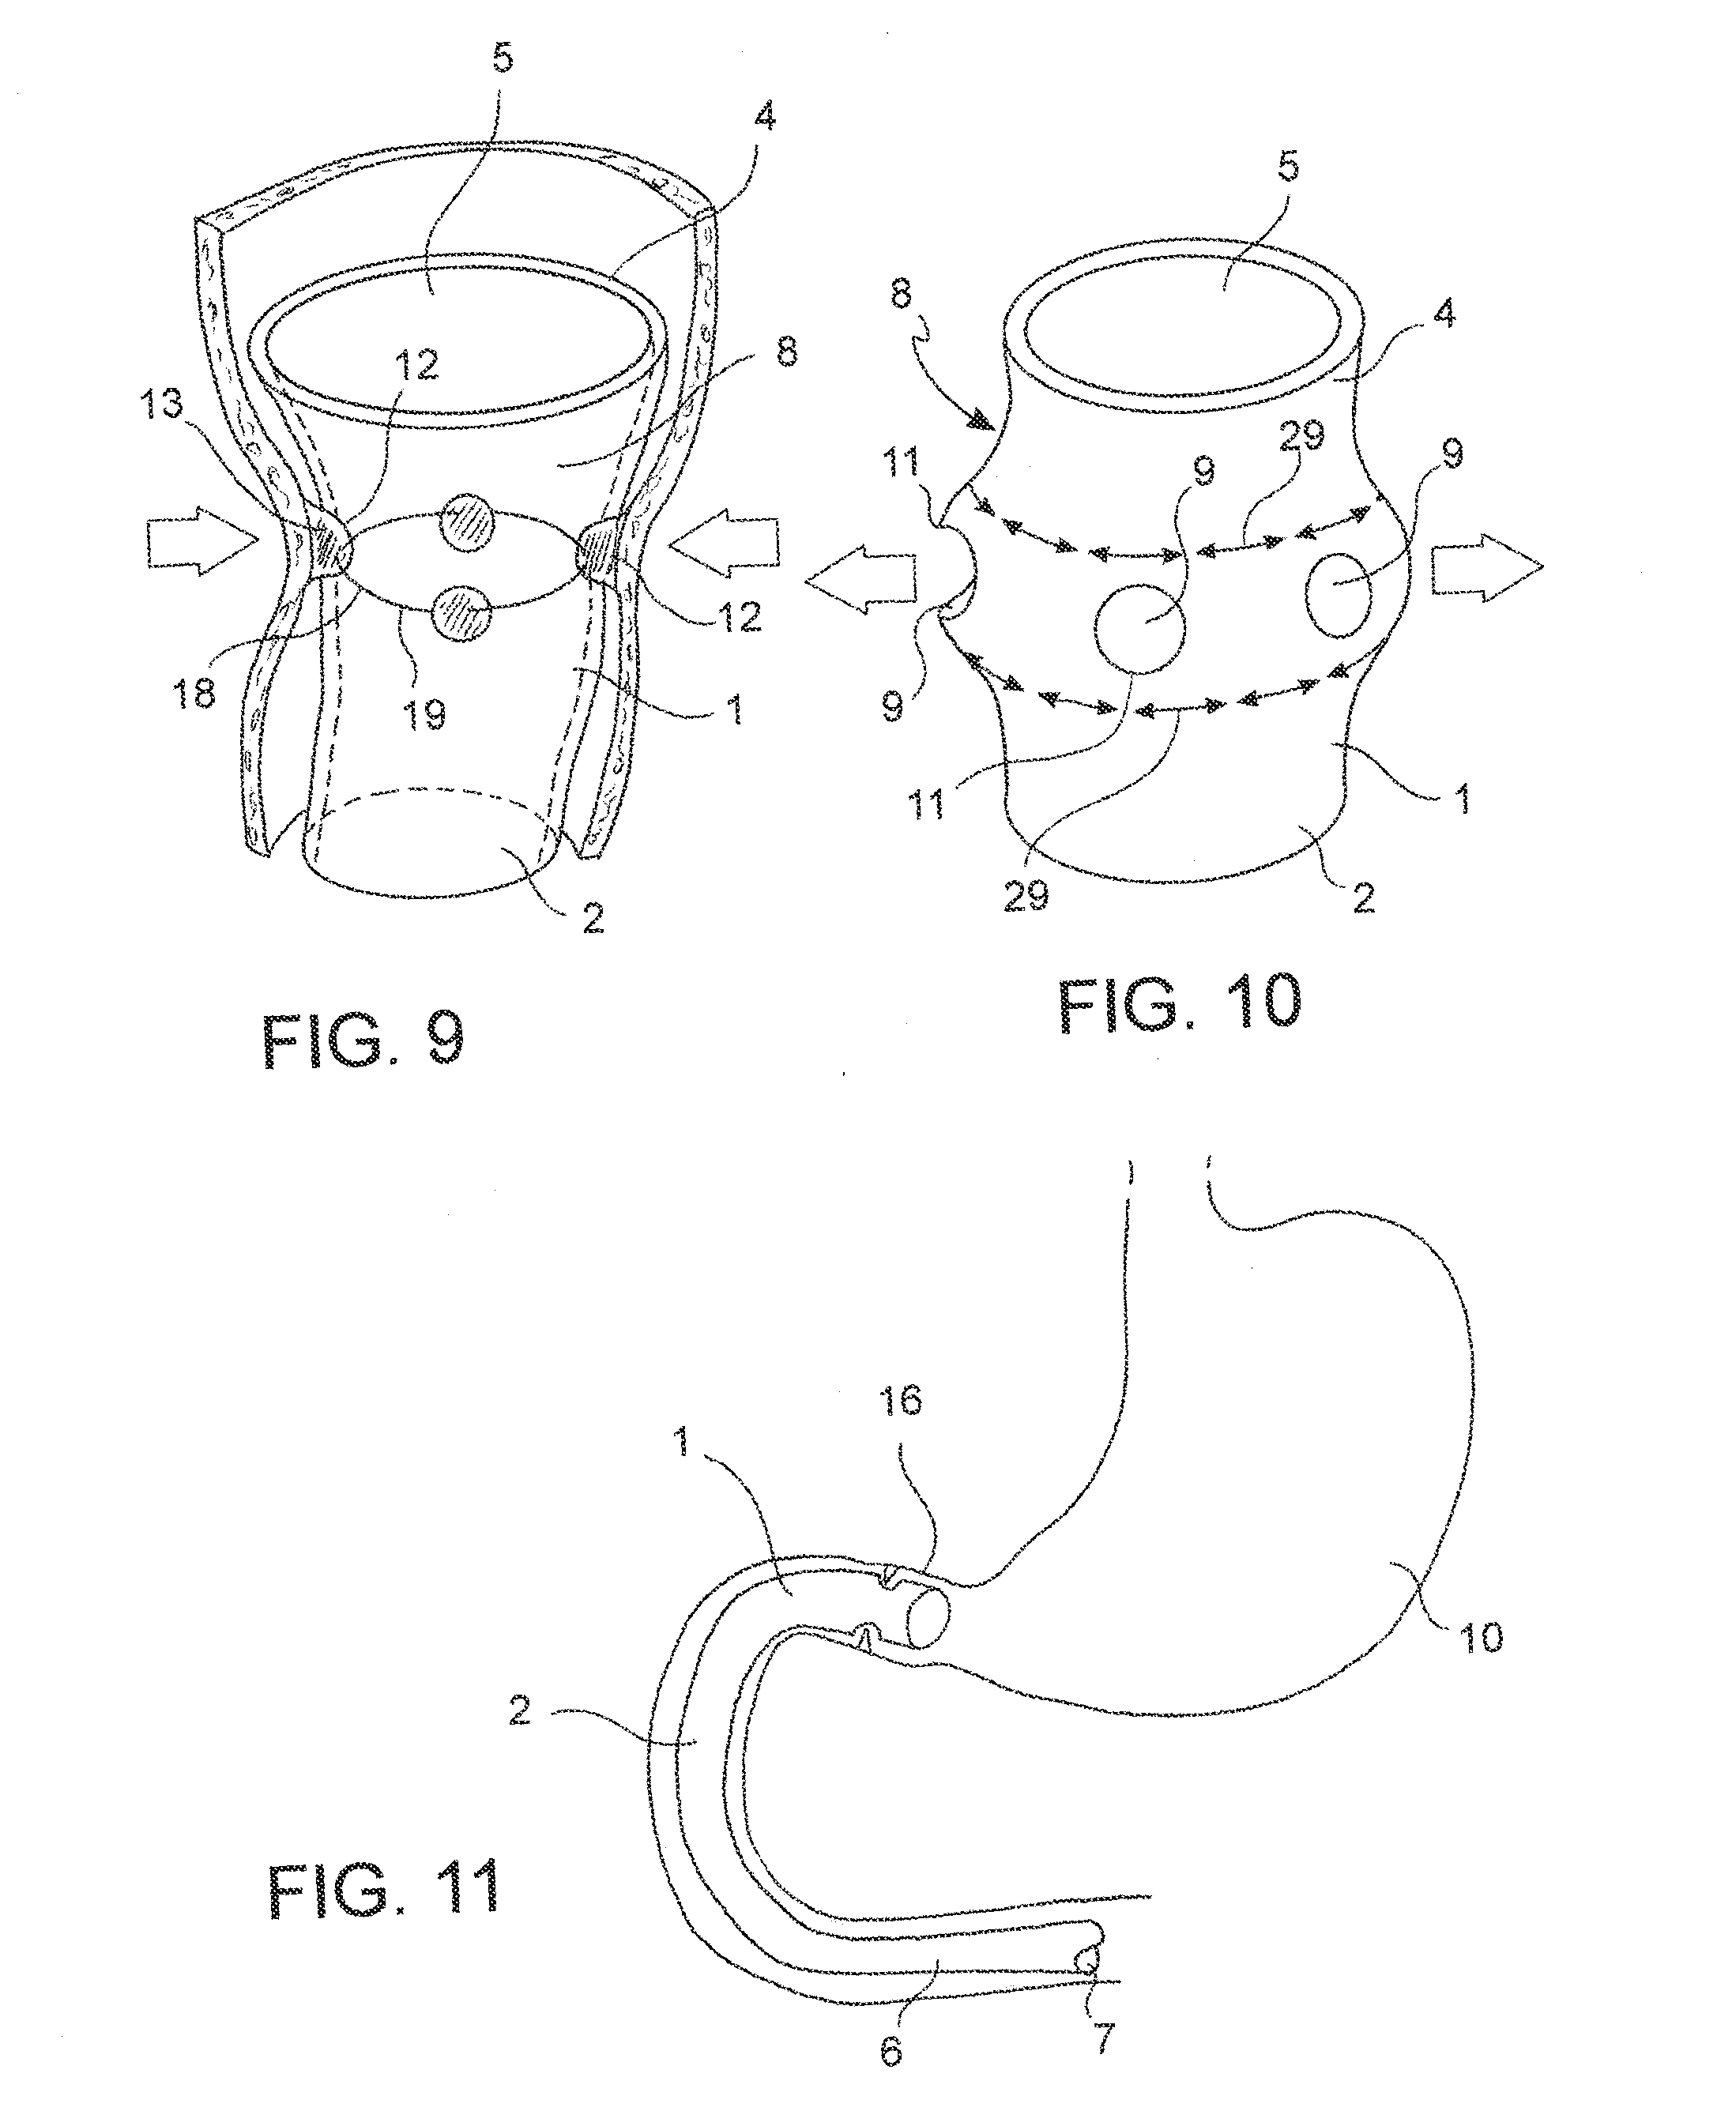 Device for Anchoring an Endoluminal Sleeve in the GI Tract